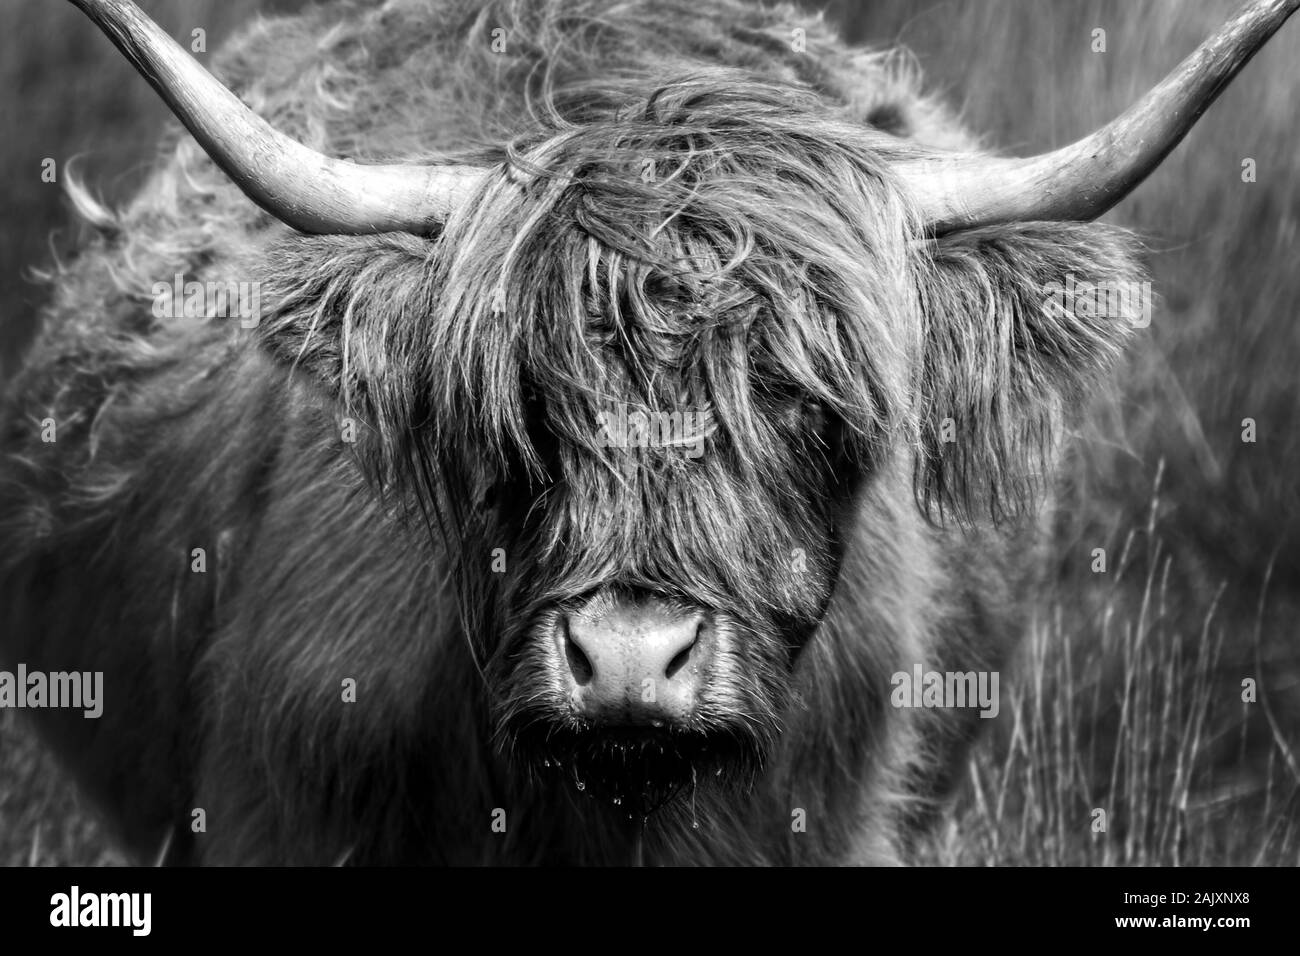 Portrait of a Highland cow. Black and white photography. Stock Photo